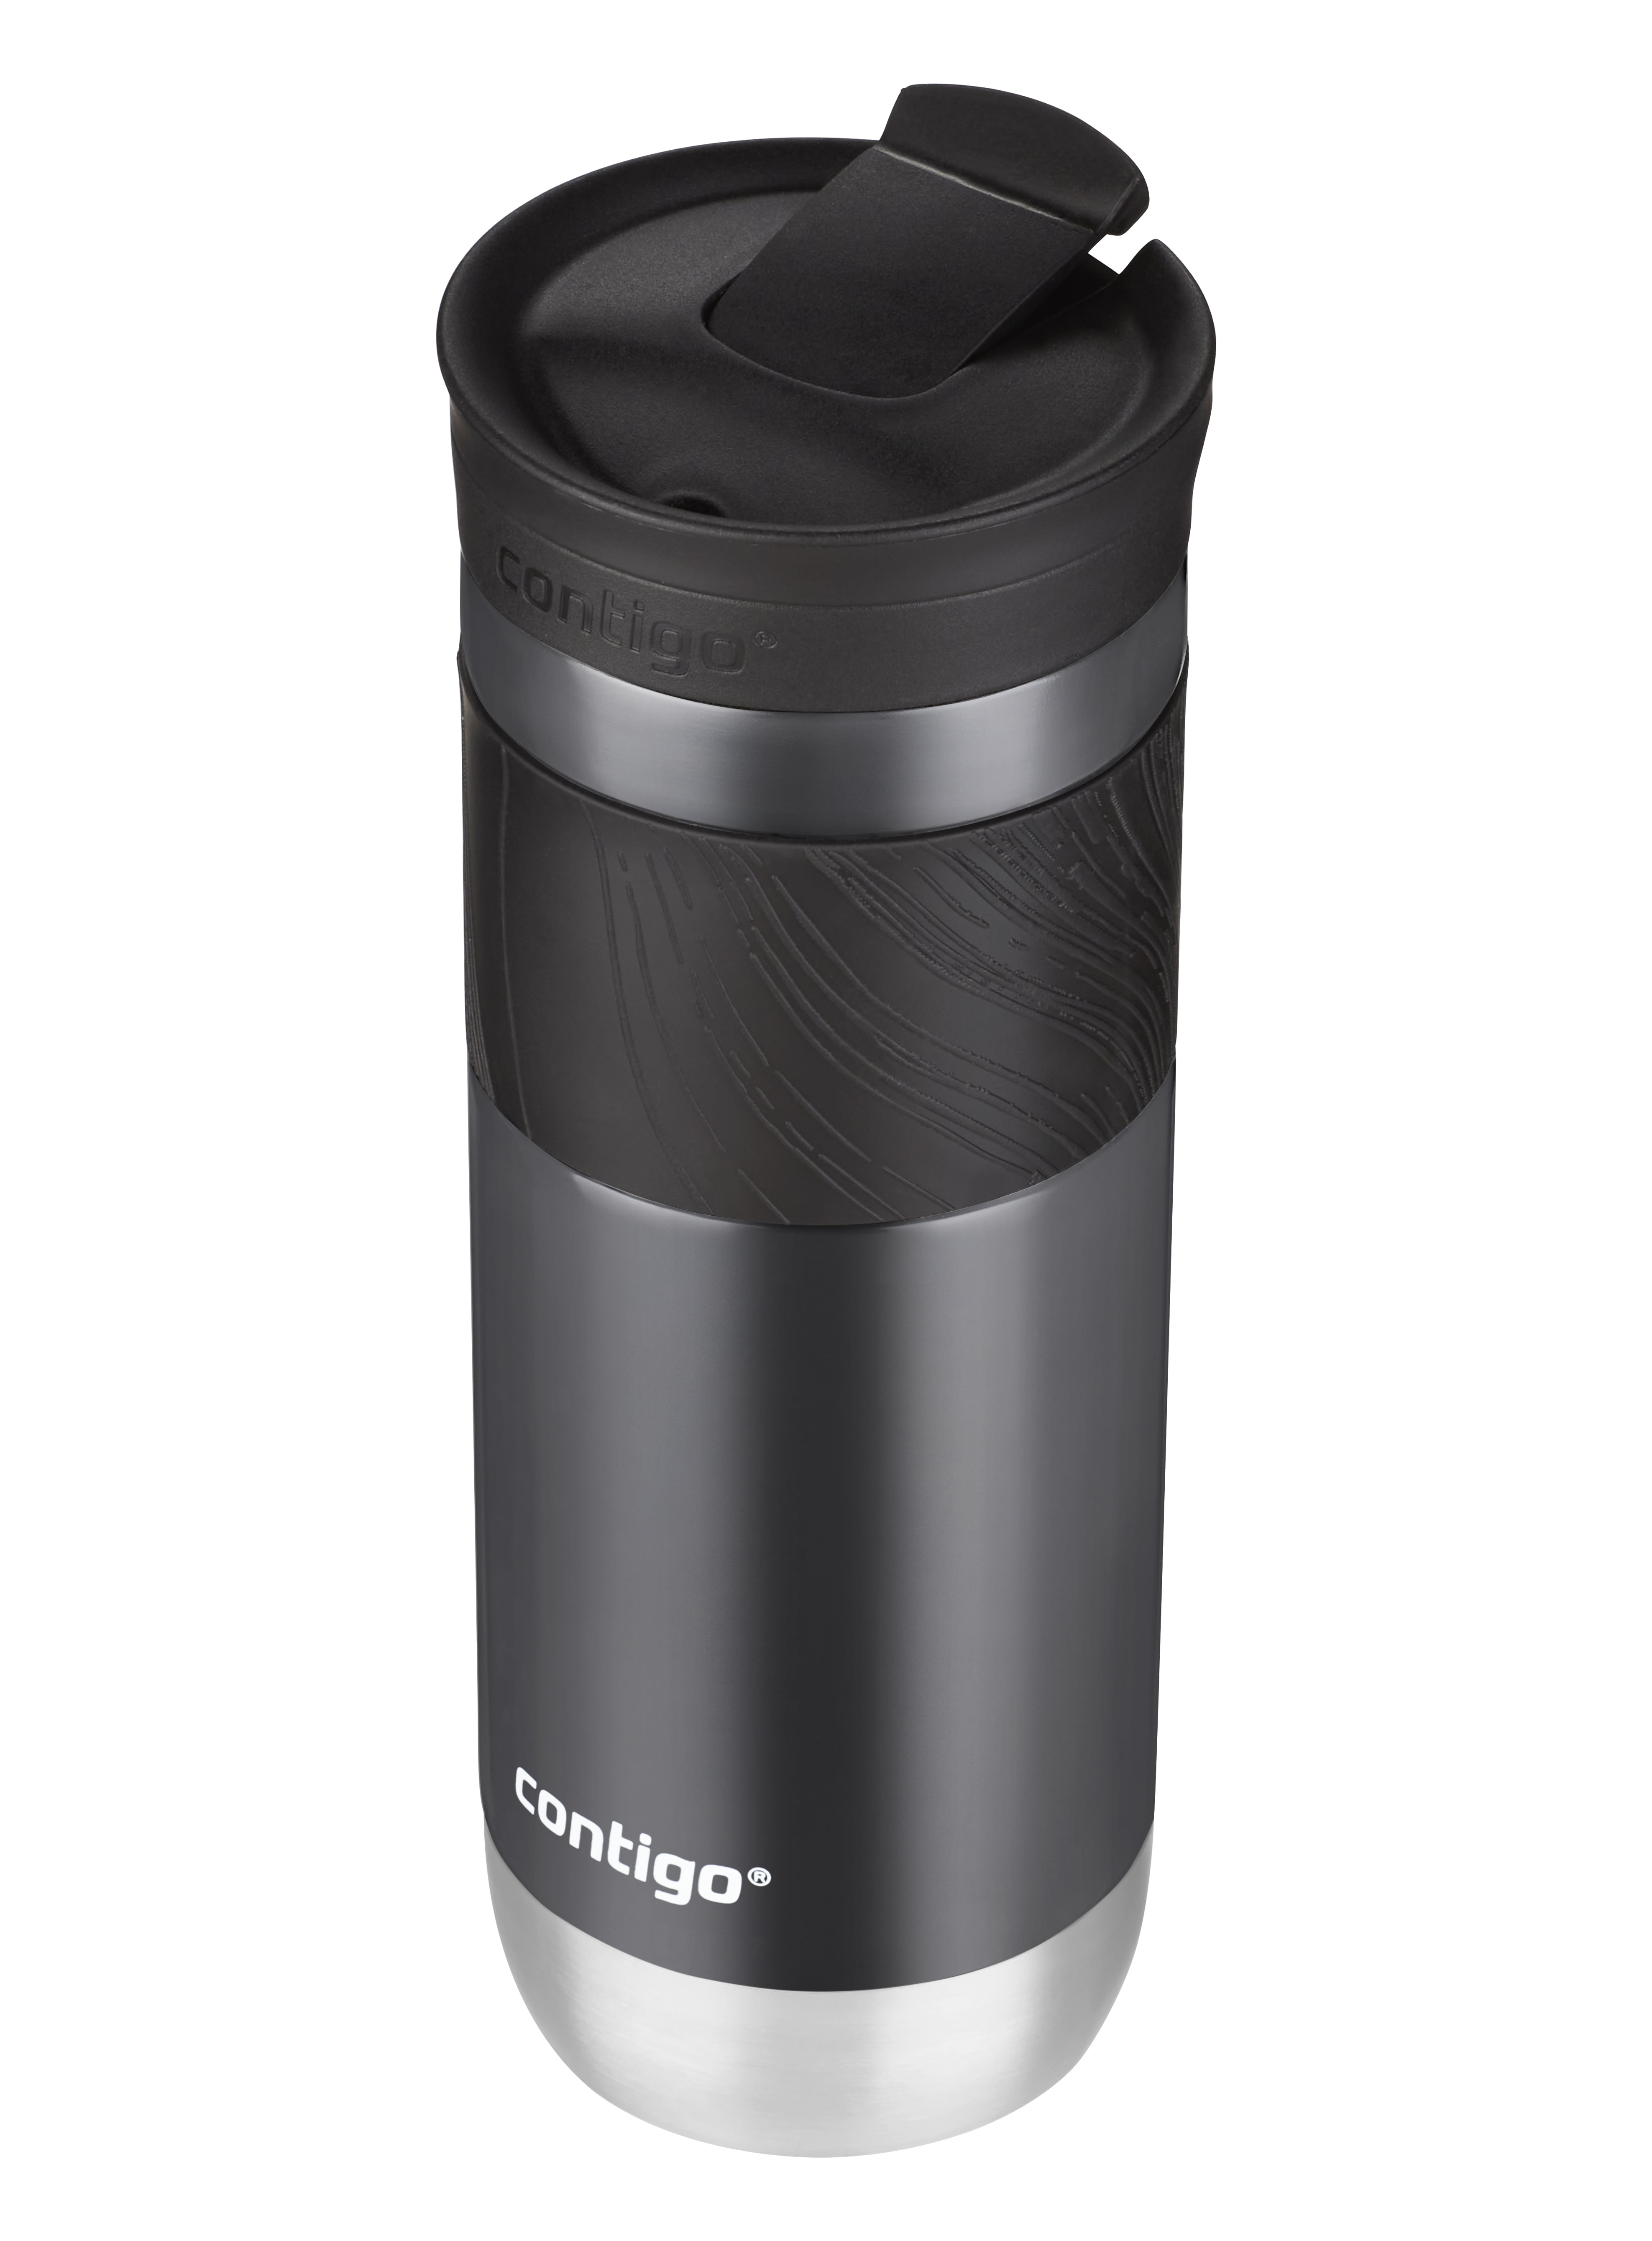 720ml Contigo Byron stainless steel snapseal travel mug @1650 Till number:  5272335 0799369495 Order via WhatsApp/Dm *Items sold as-is in…